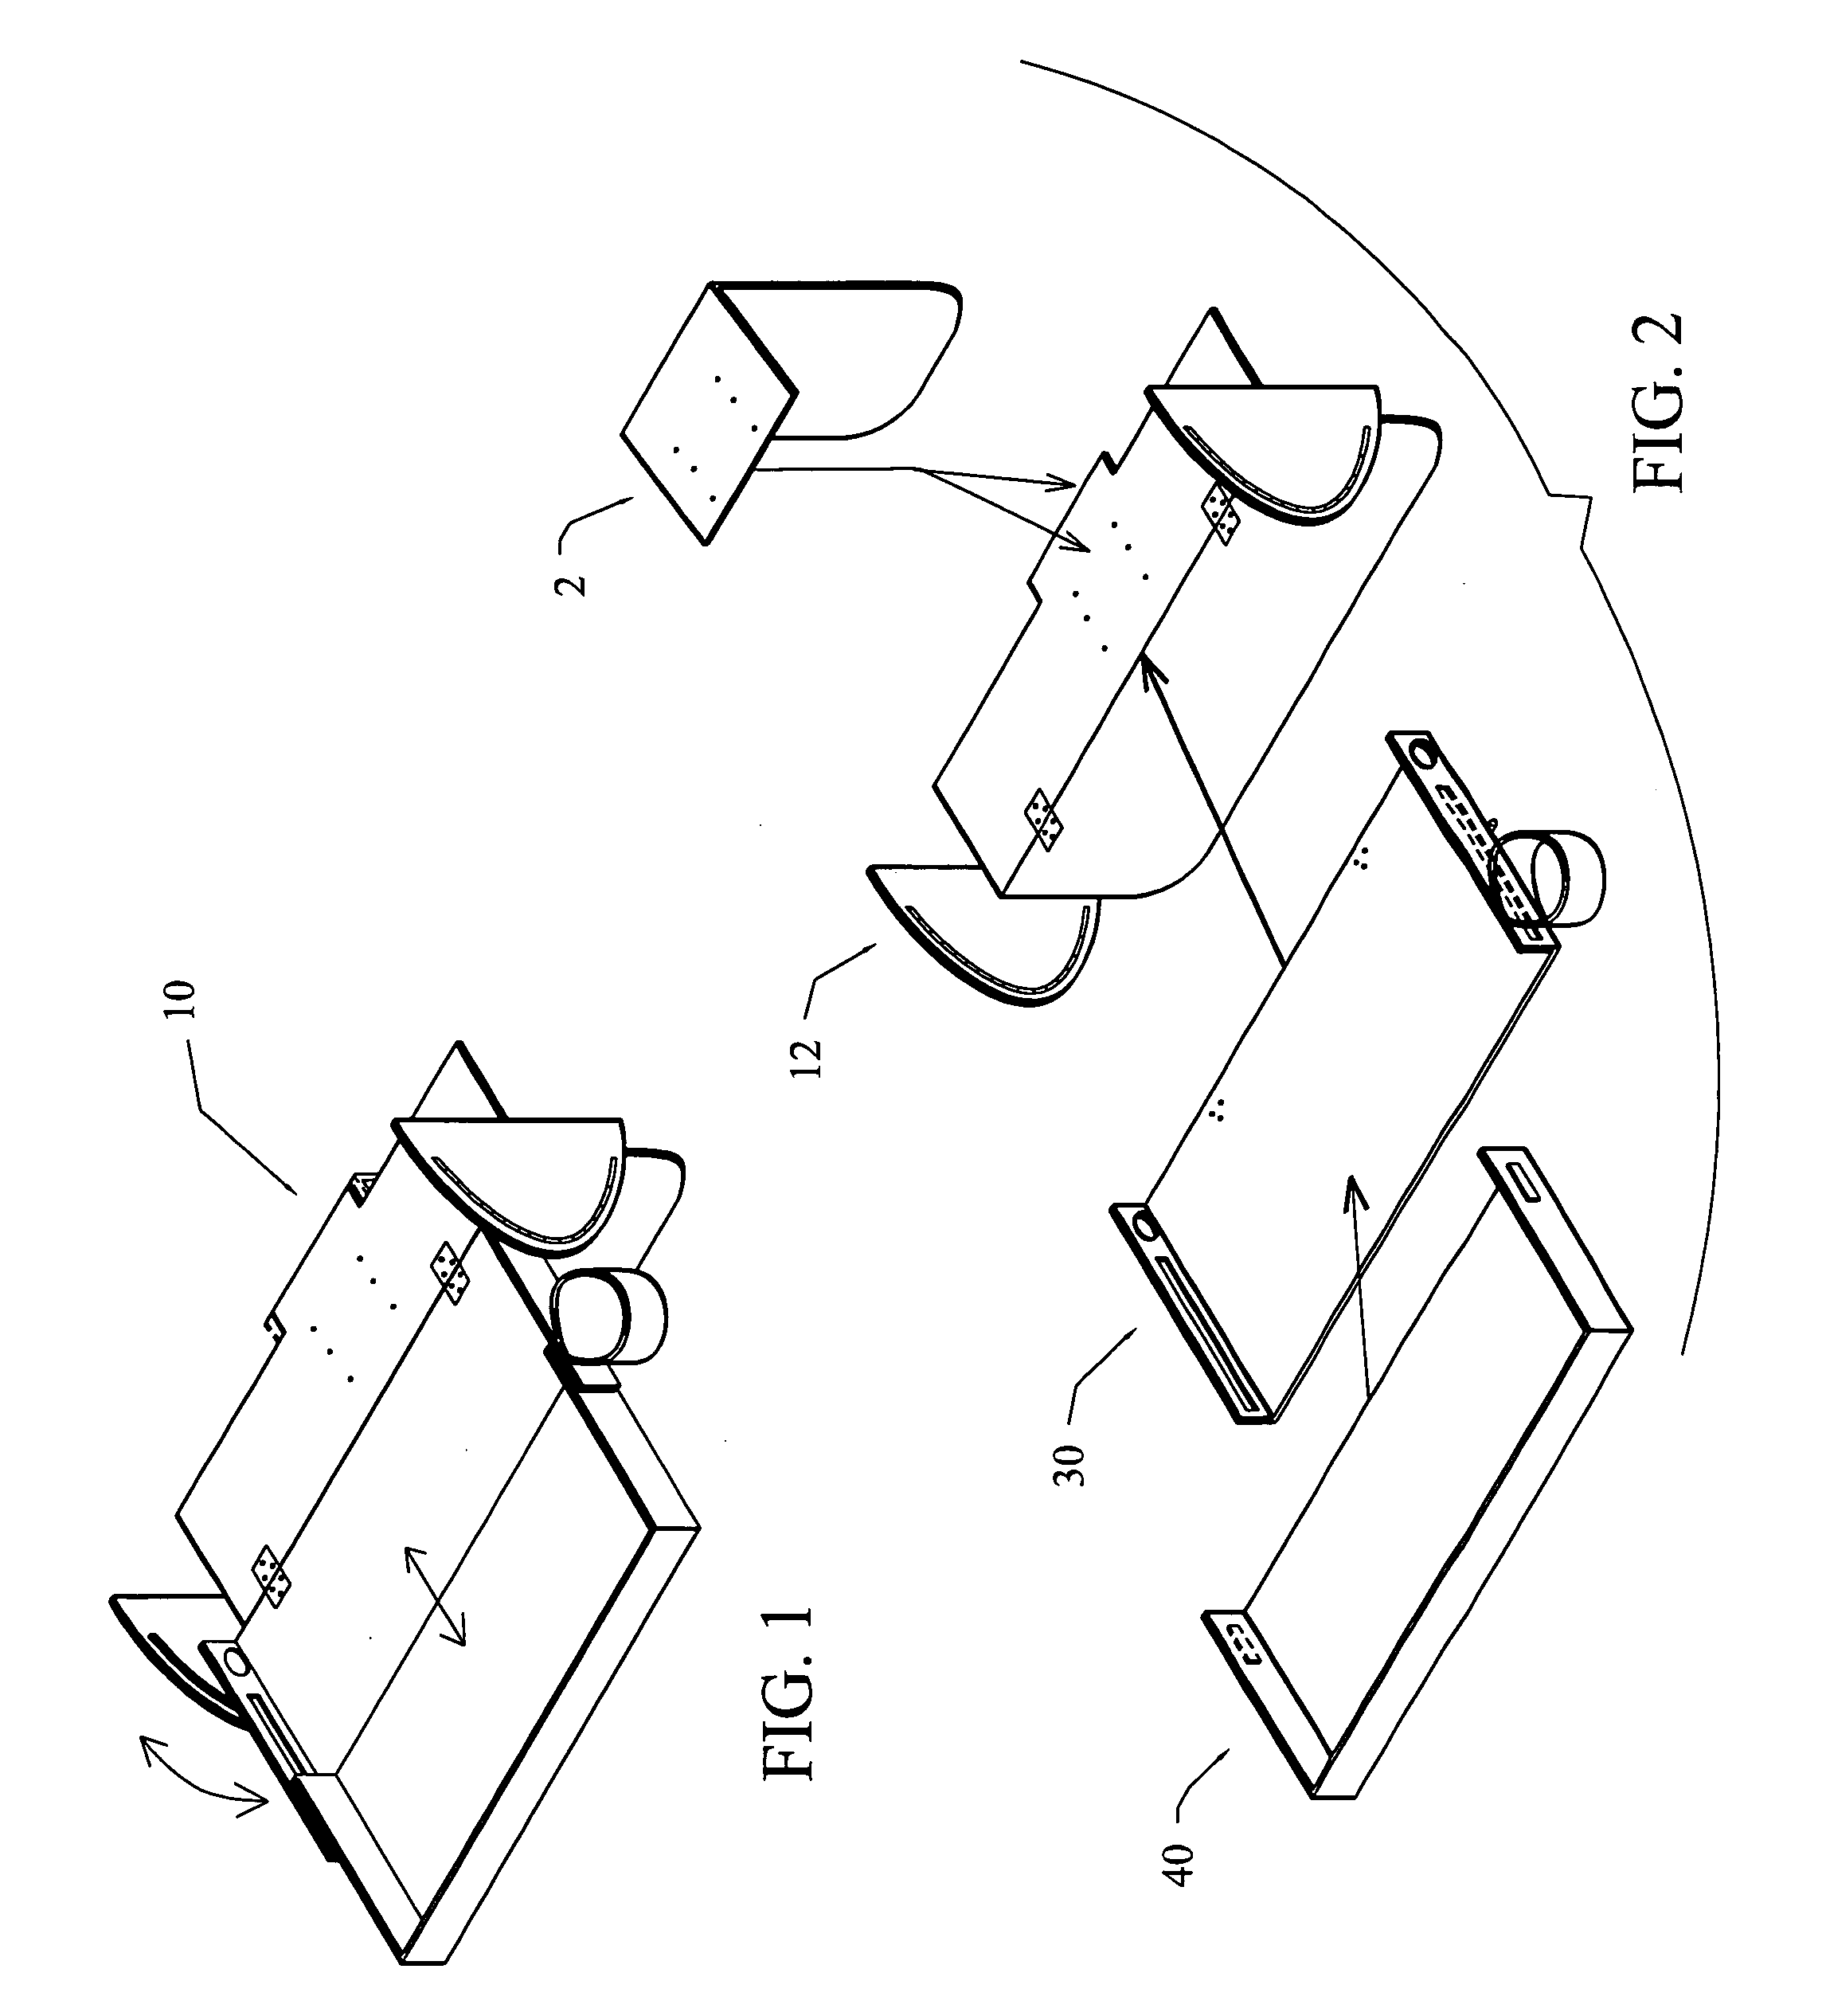 Portable platforms and methods of use